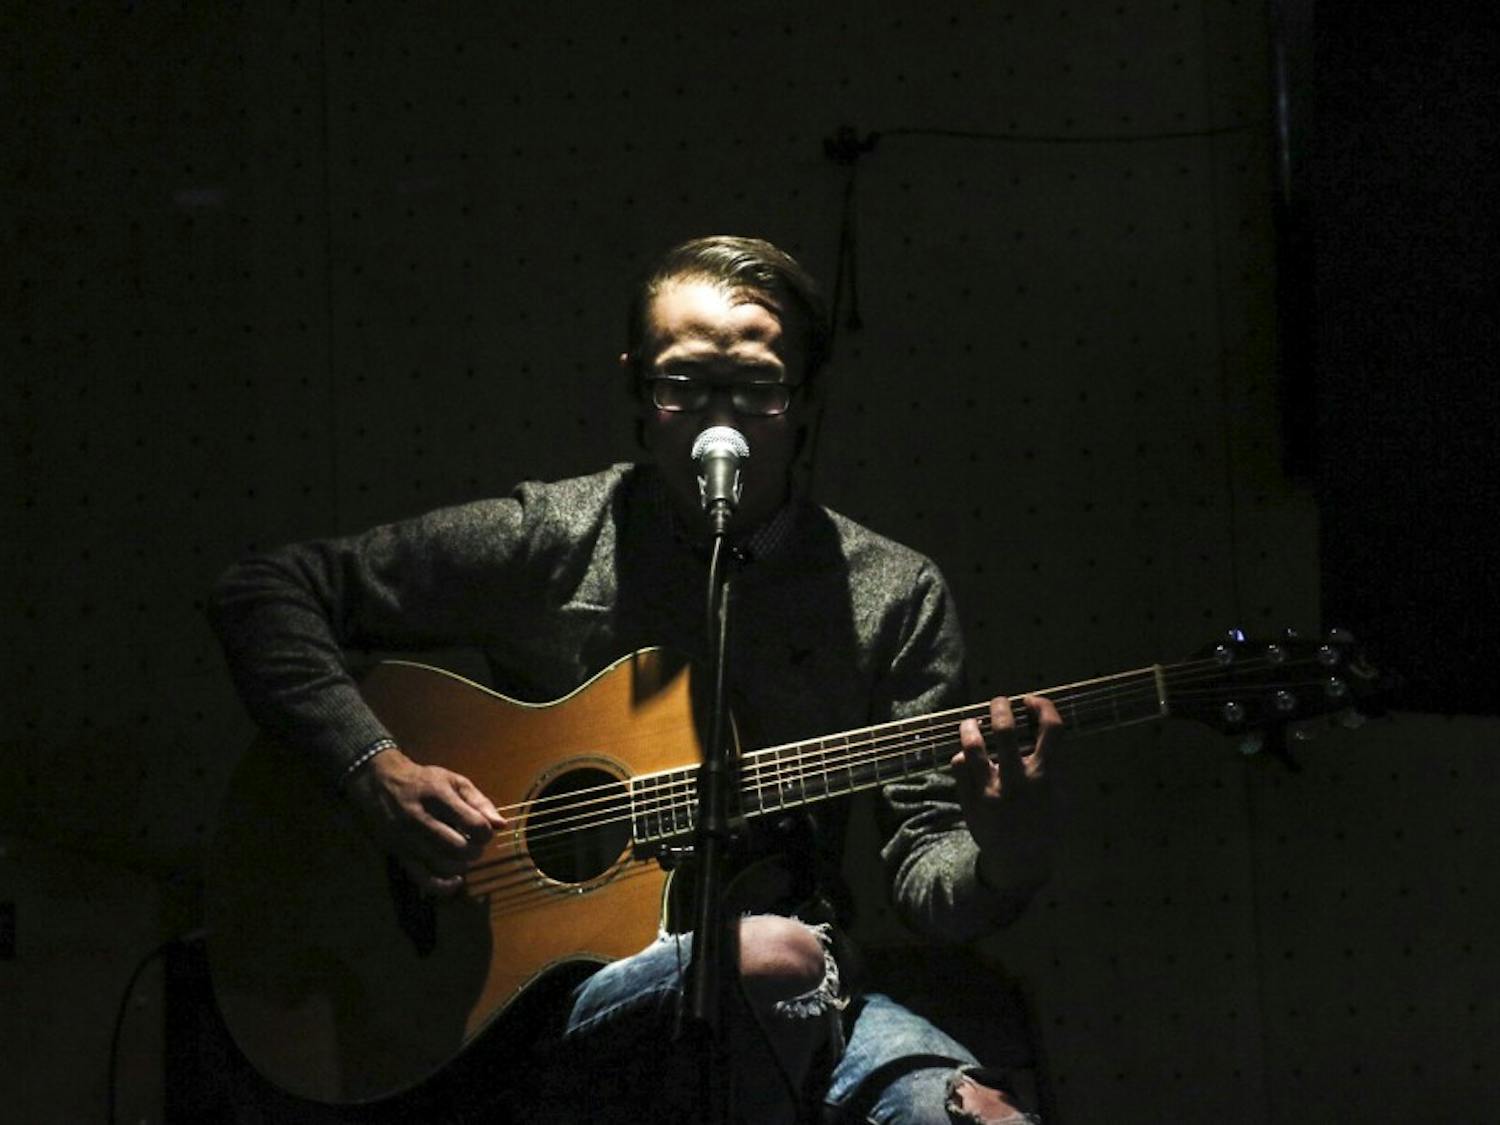 Singer-songwriter Malcolm Reese performs a set at Brickyard Pizza on&nbsp;Tuesday, Feb. 7, 2017. Reese is a local Albuquerque musician that performs solo projects as well as being the vocalist to another local band, Dakota Ave.